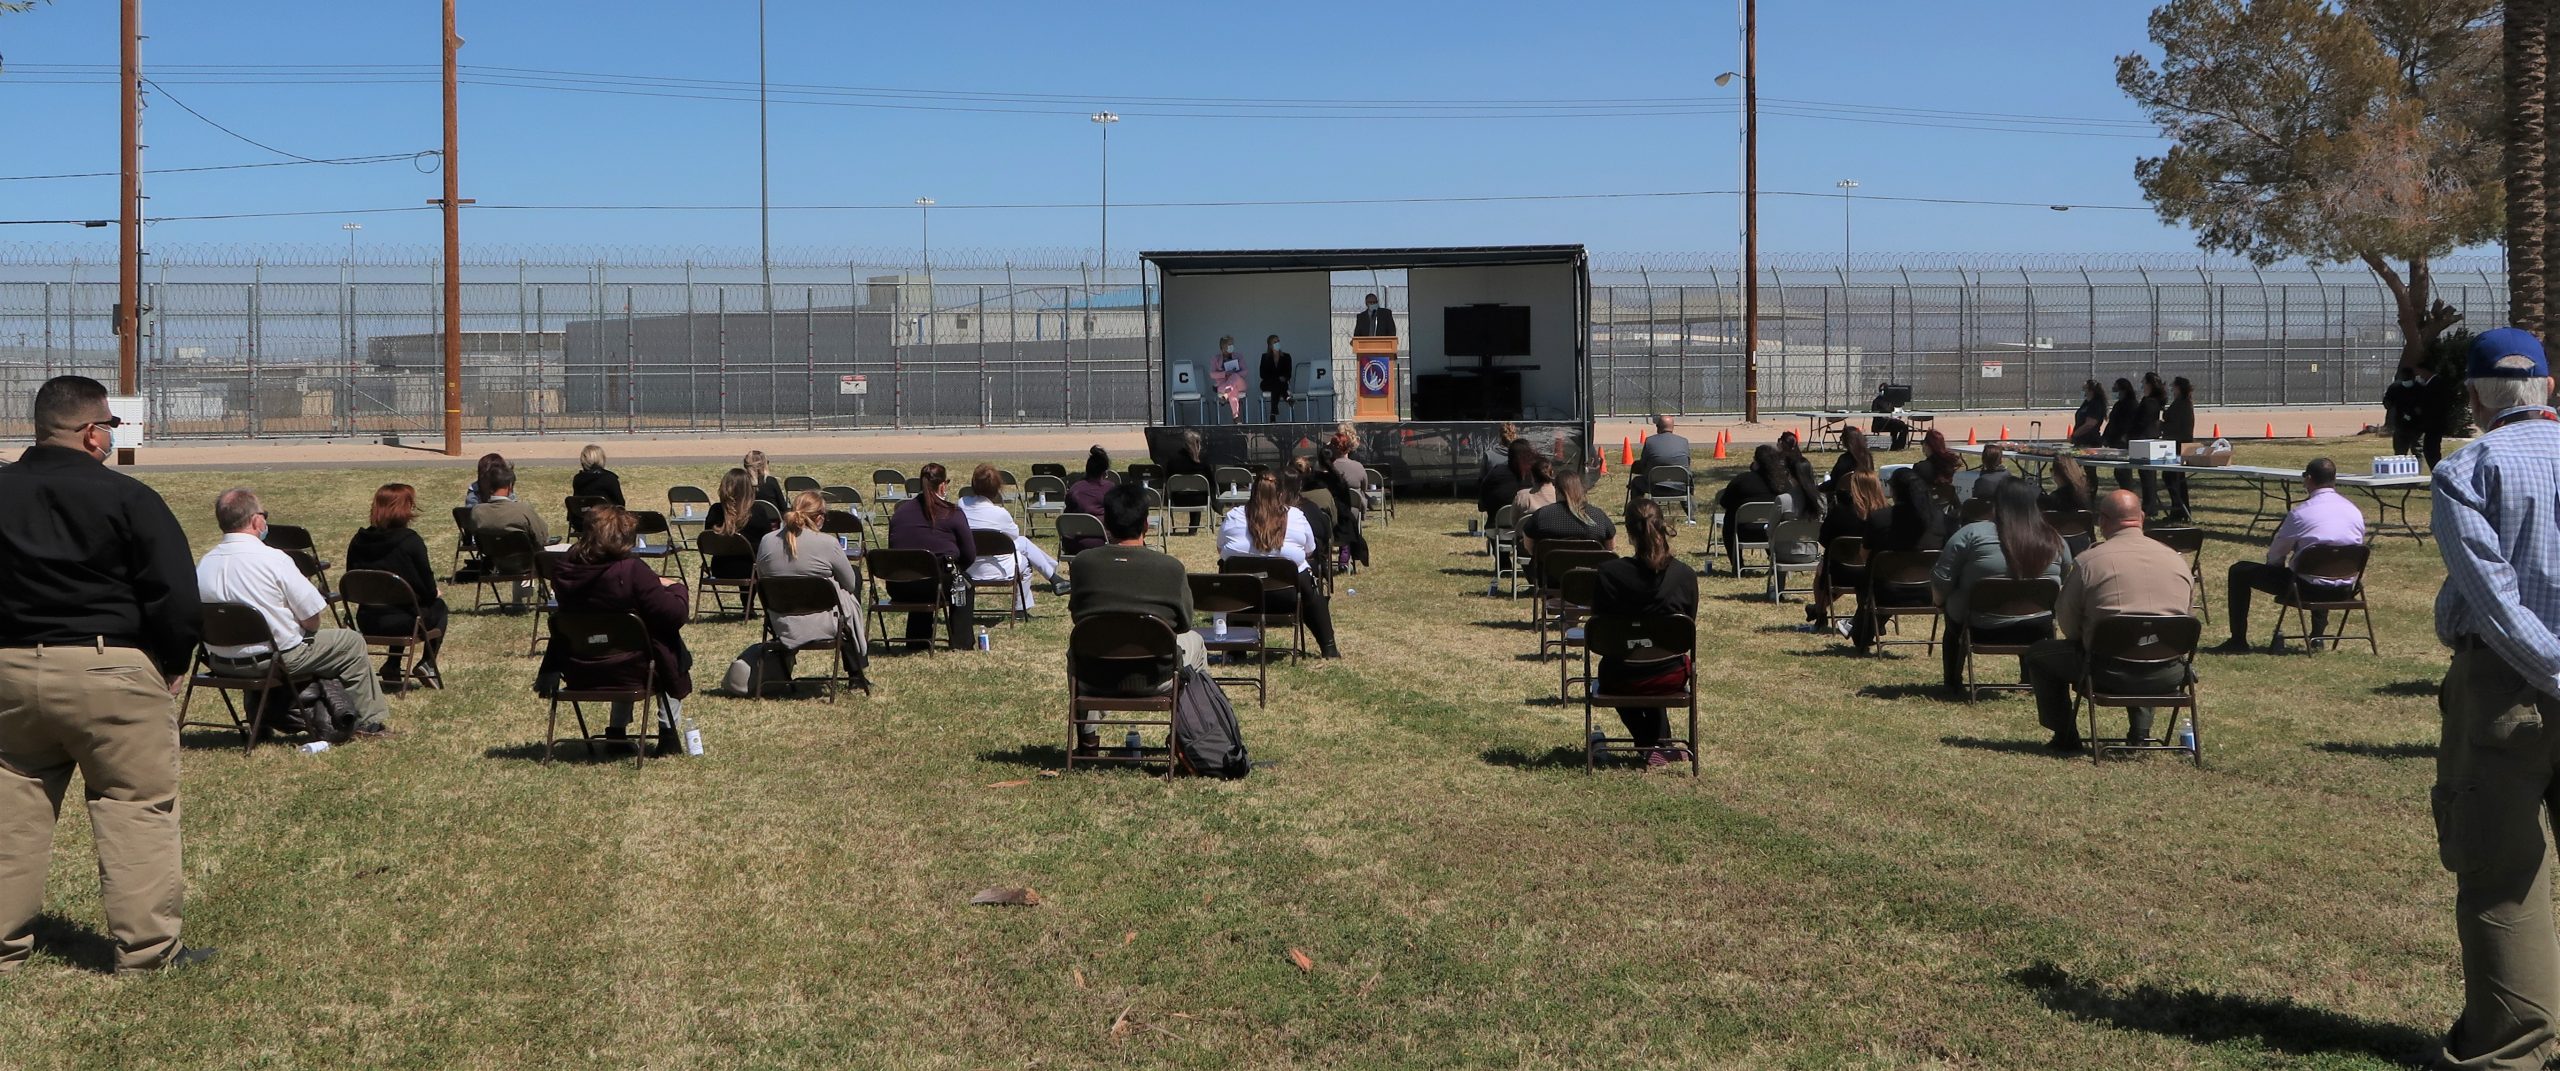 People sit in chairs at Chuckawalla prison for National Women's History Month.